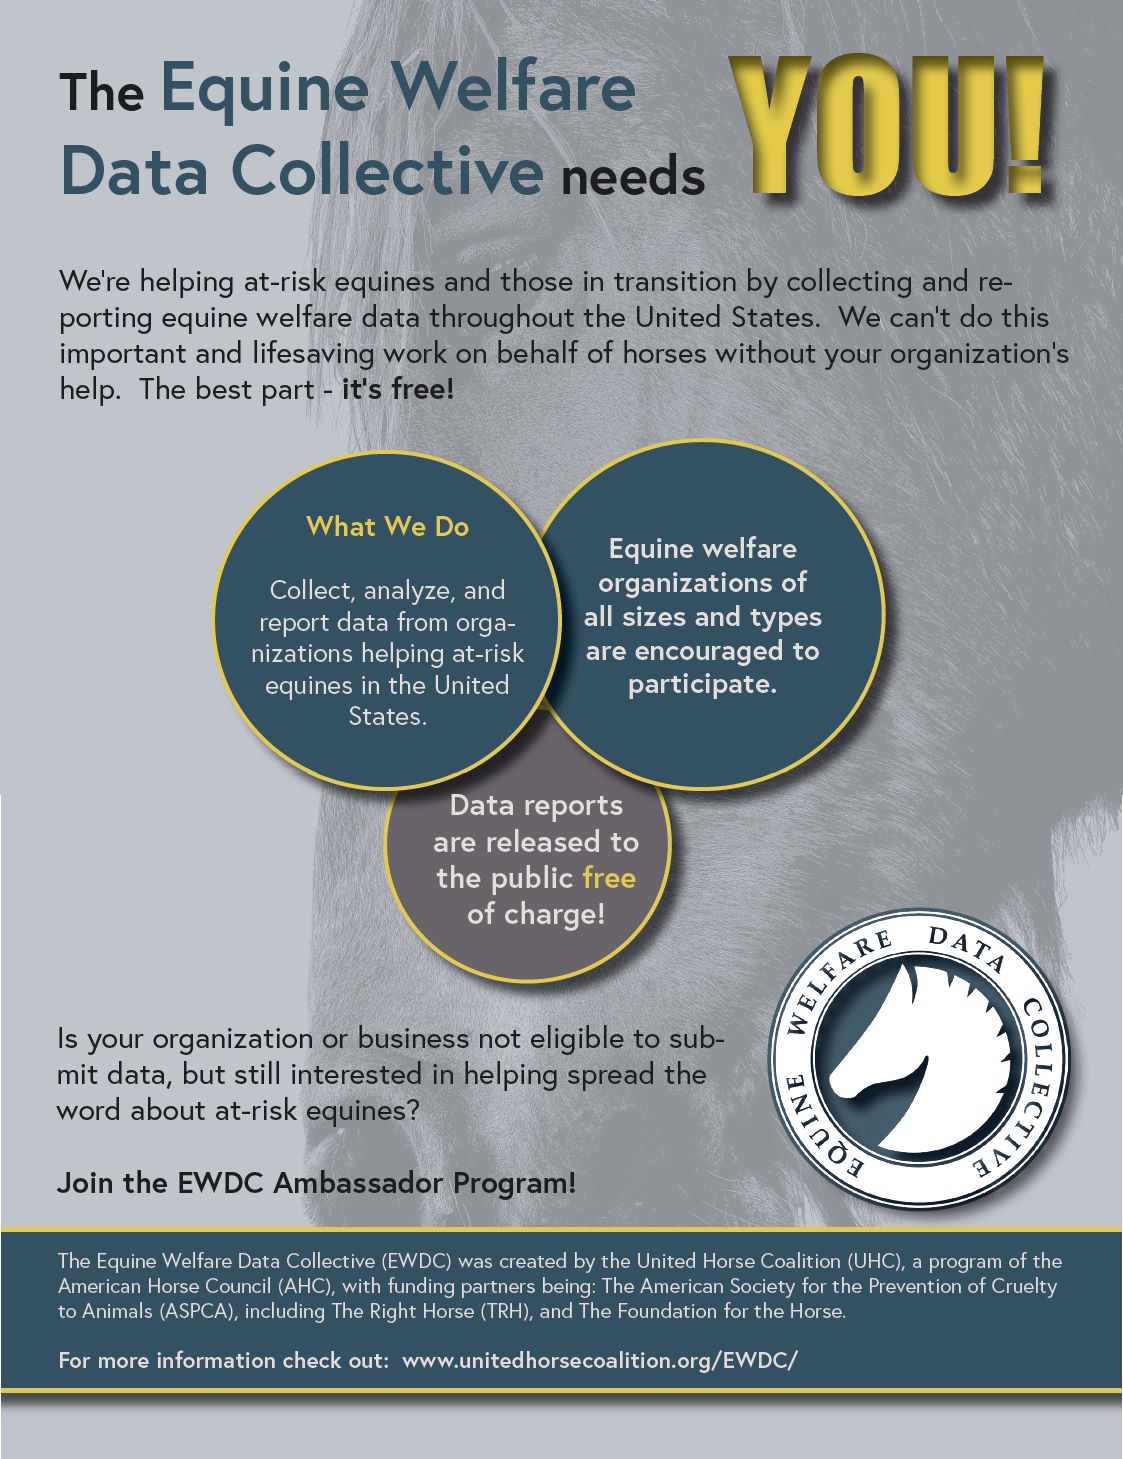 EWDC is excited to announce the July 2020 Data Drive